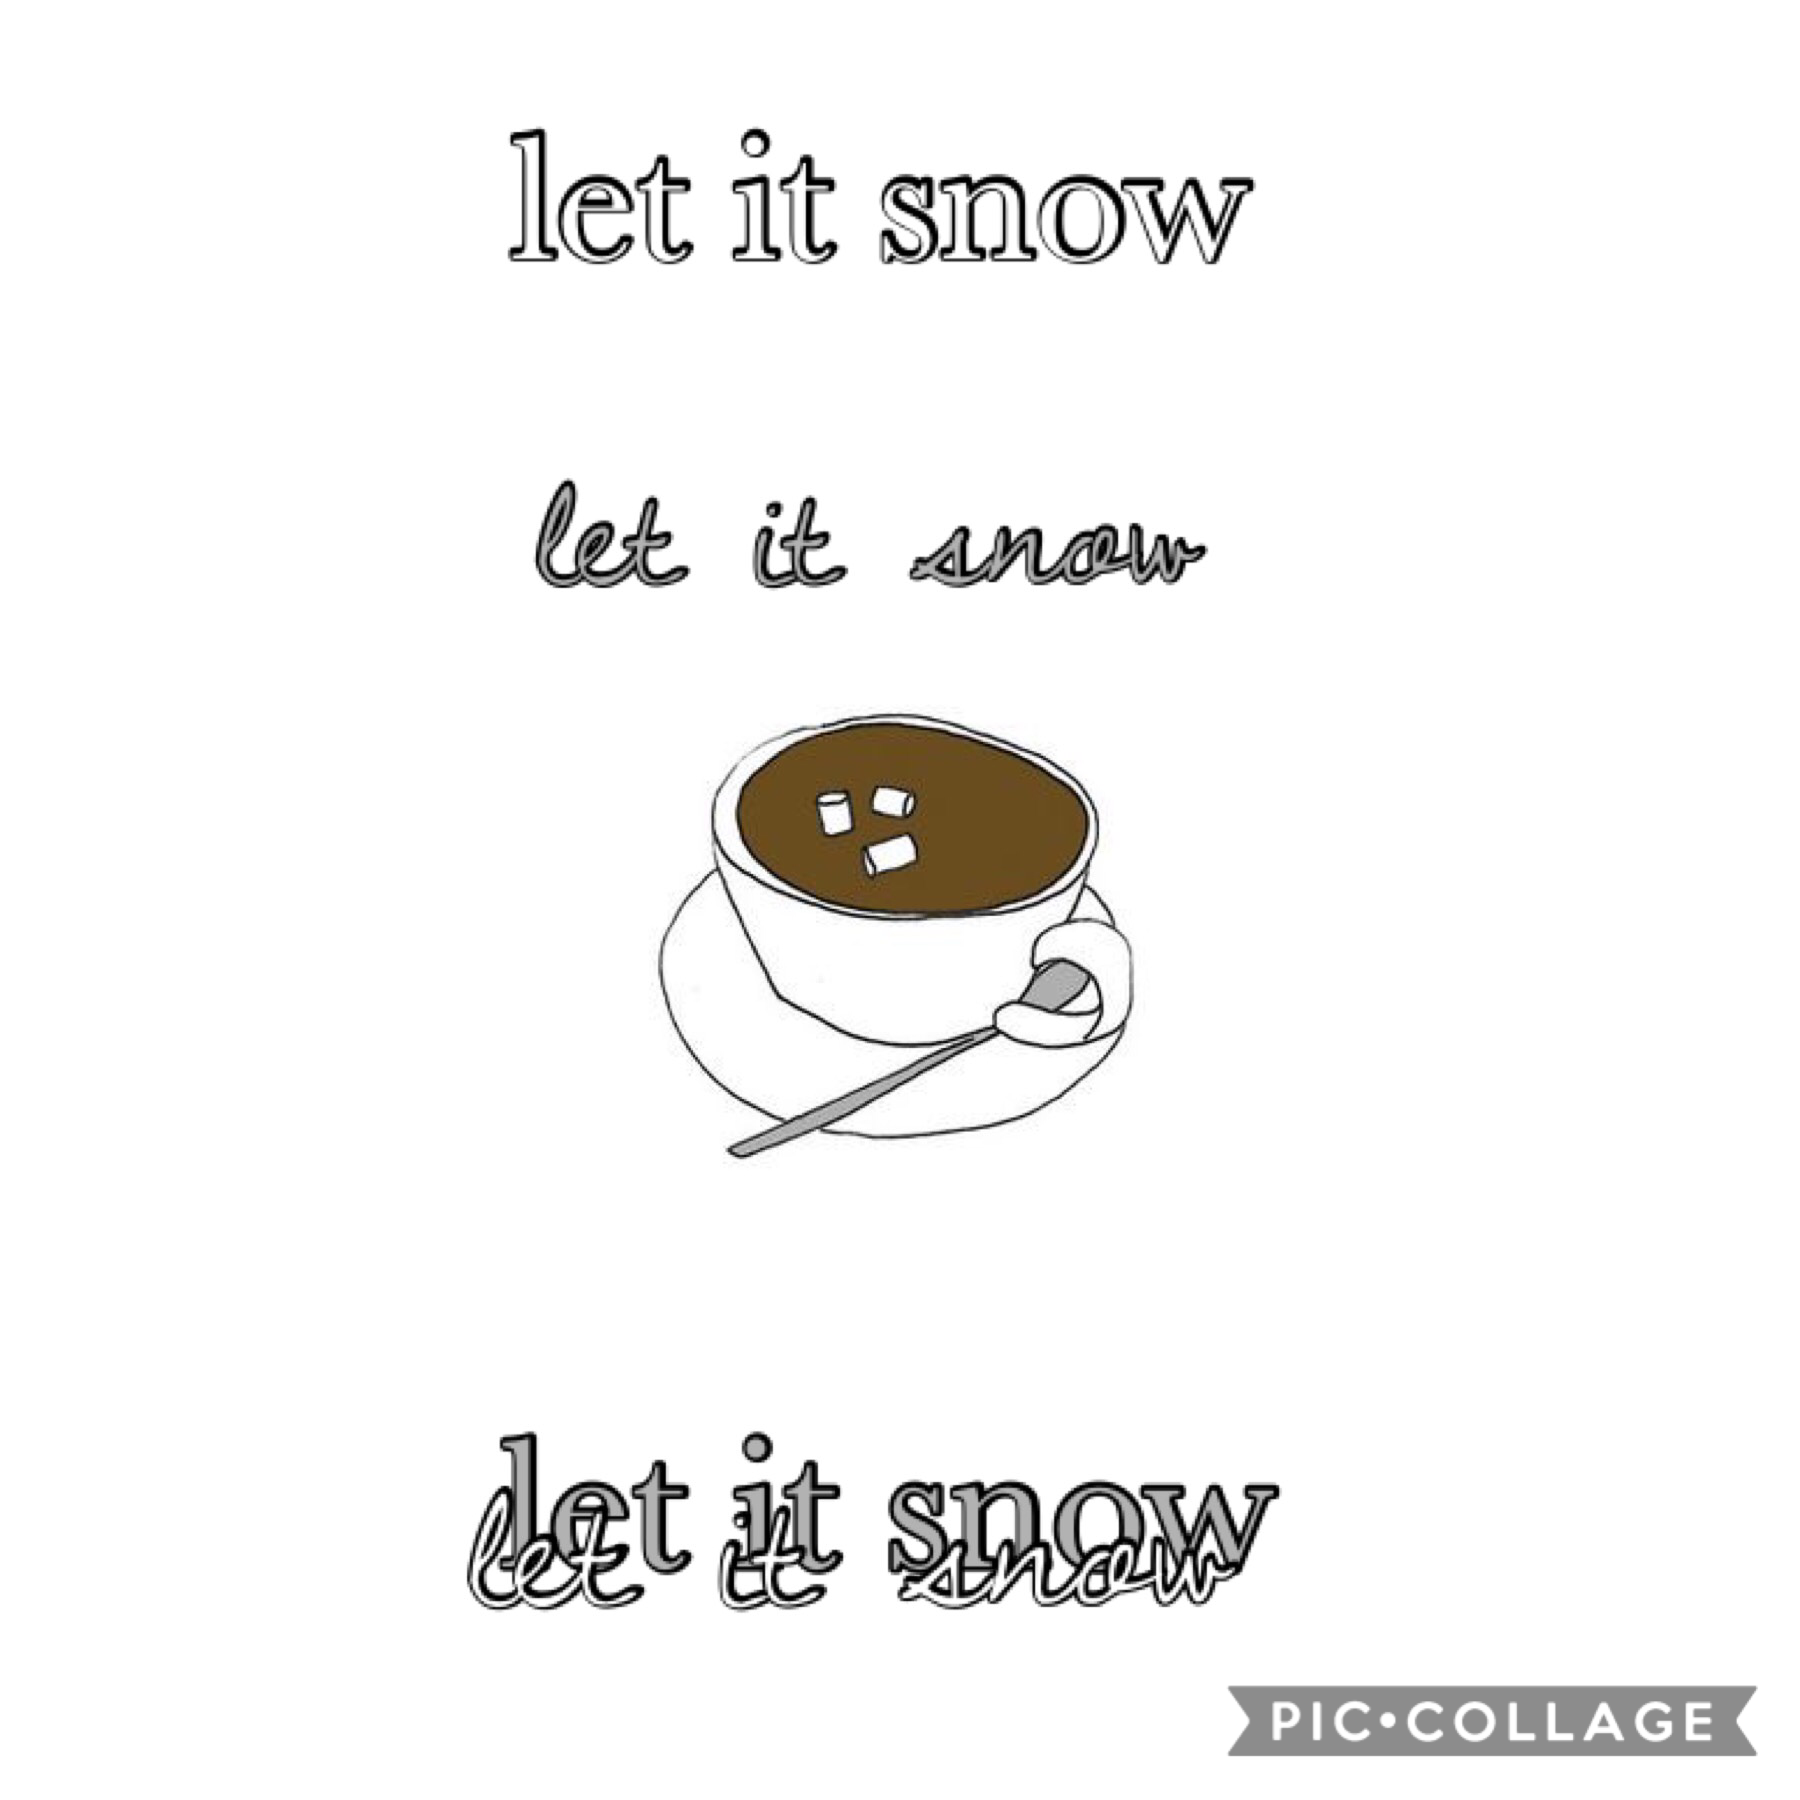 simple but idk. had a snow day